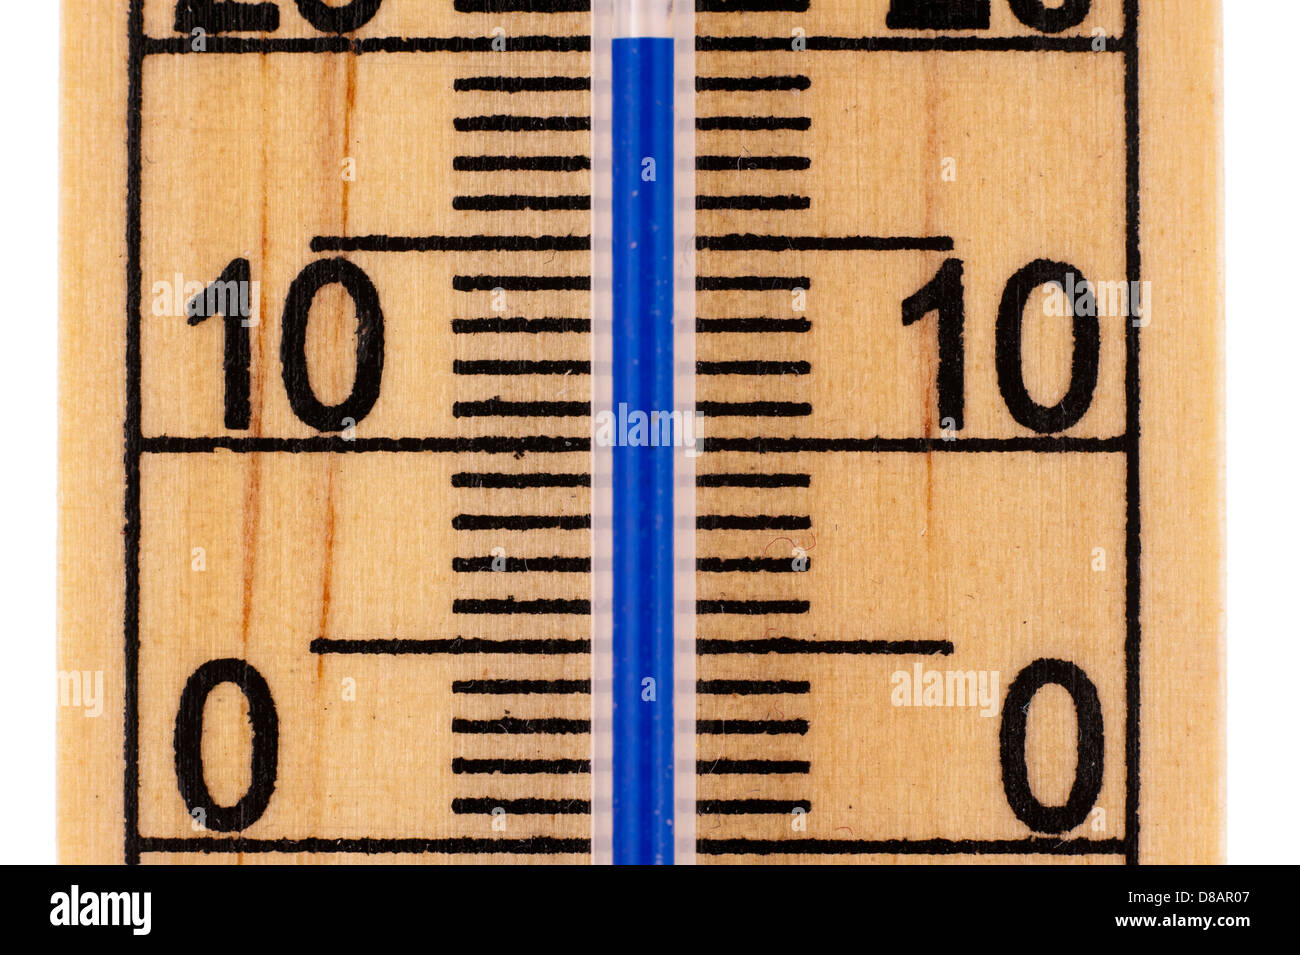 Straight close up an old fashioned Mercury room thermometer in Celsius scale Stock Photo